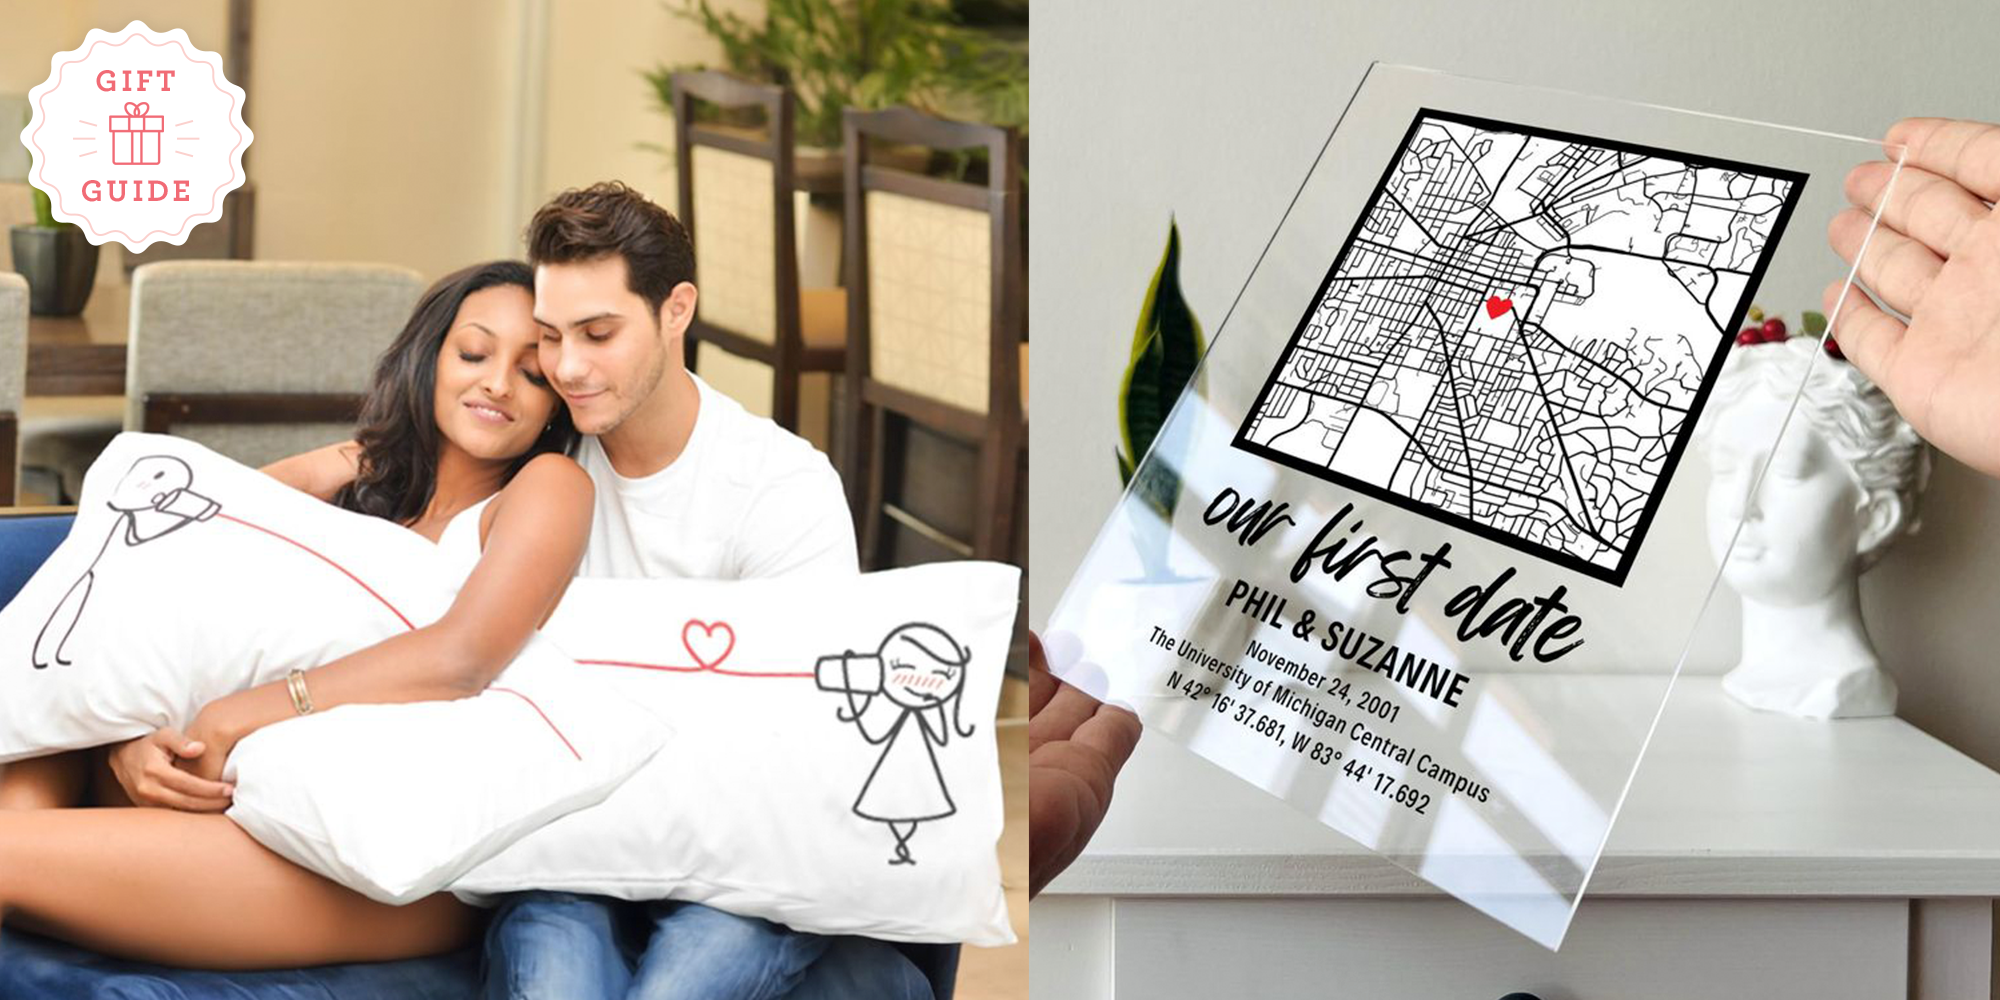 30 First Wedding Anniversary Gifts & Ideas - hitched.co.uk